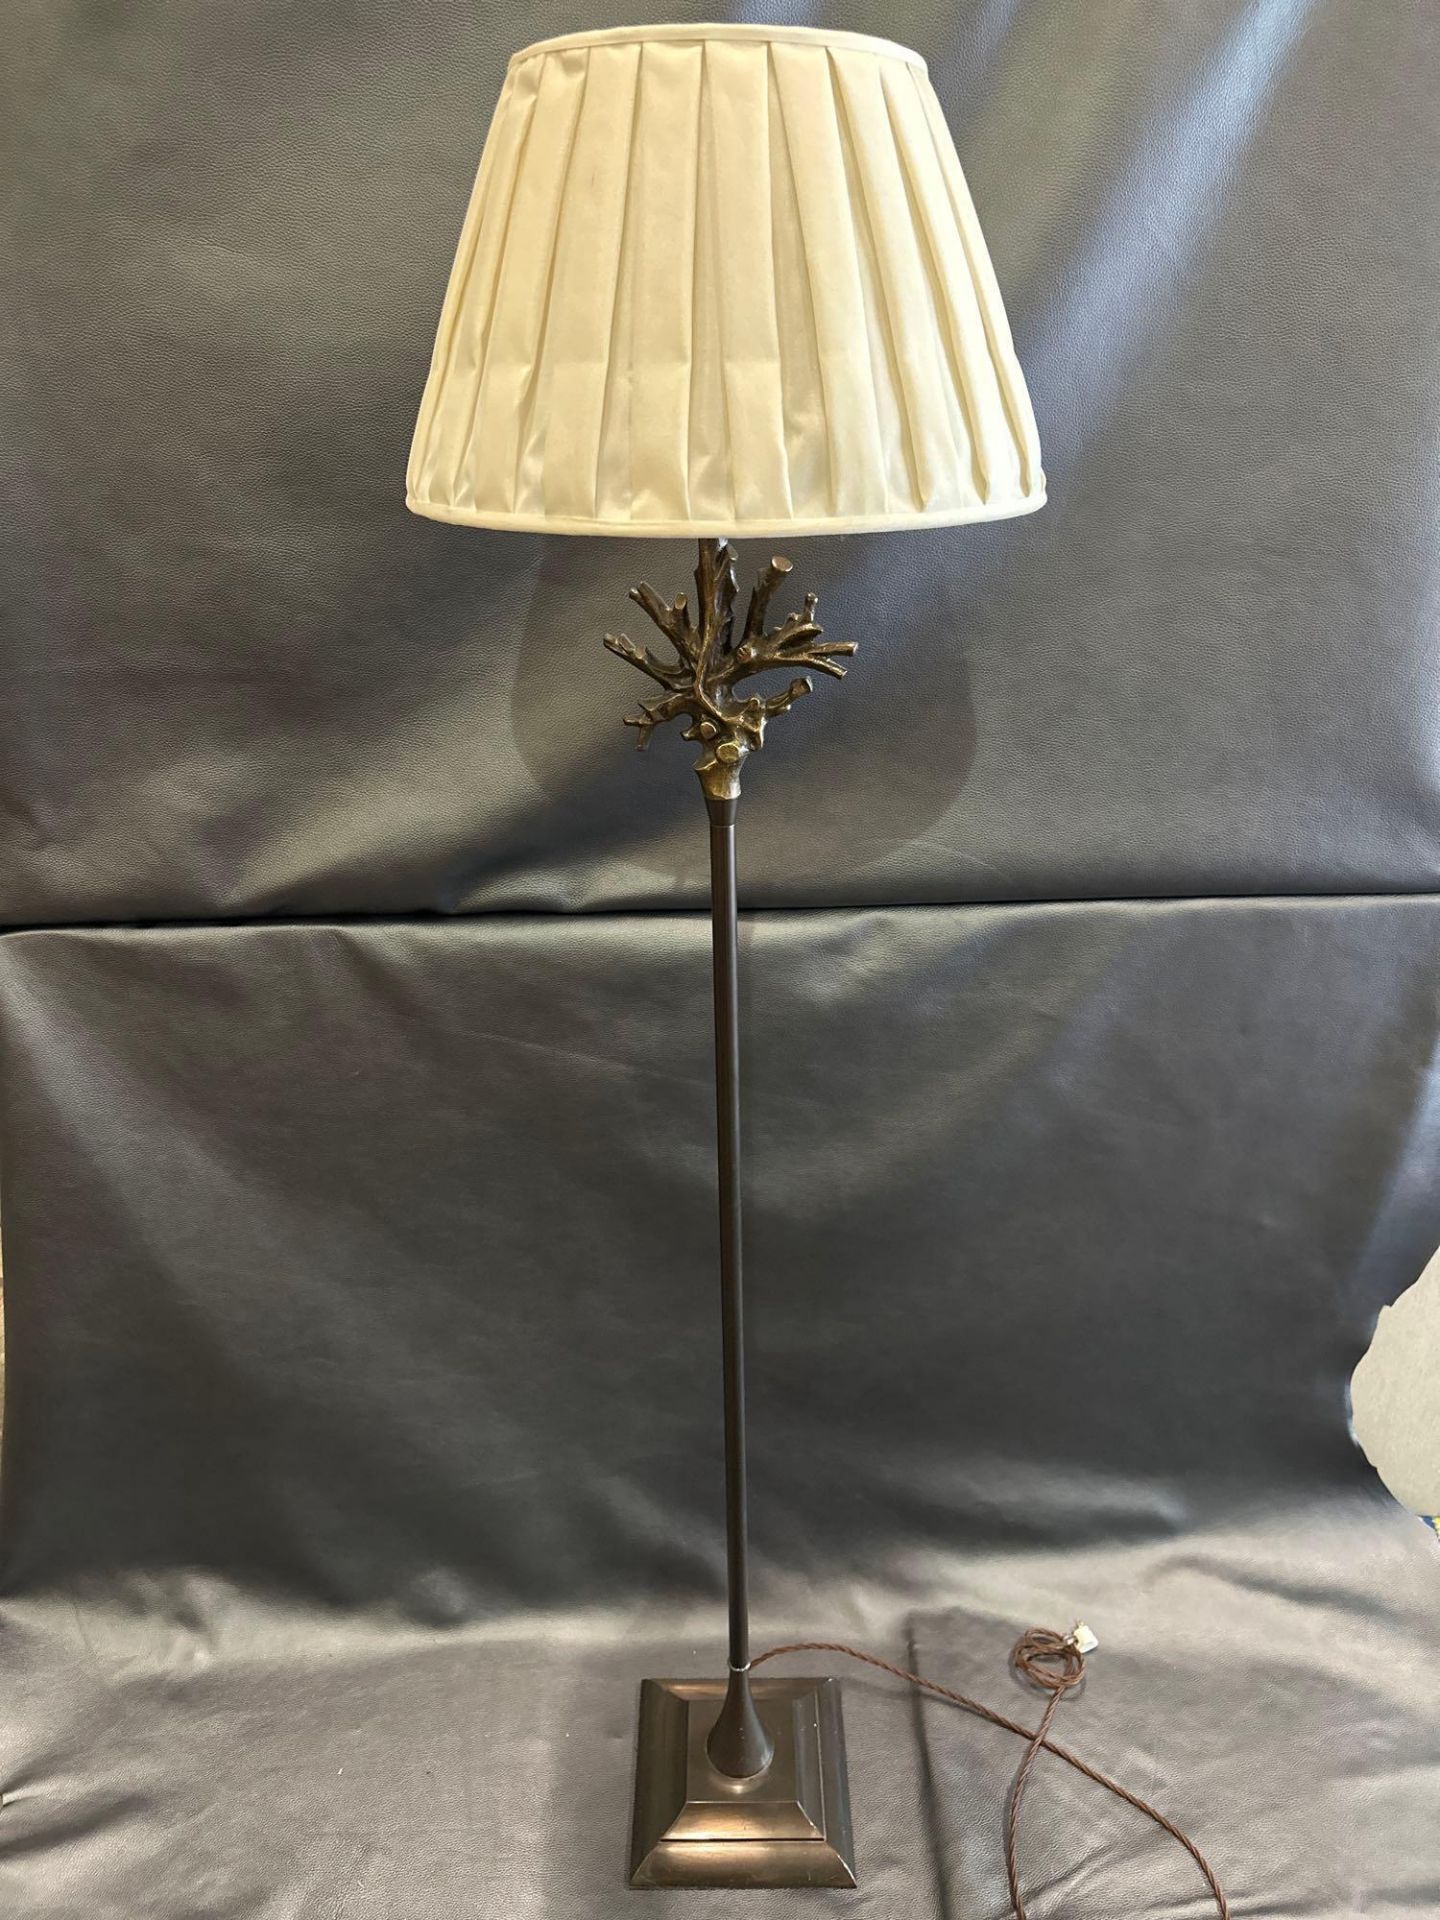 Heathfield And Co Coral Standard Lamp With Linen Shade 180cm